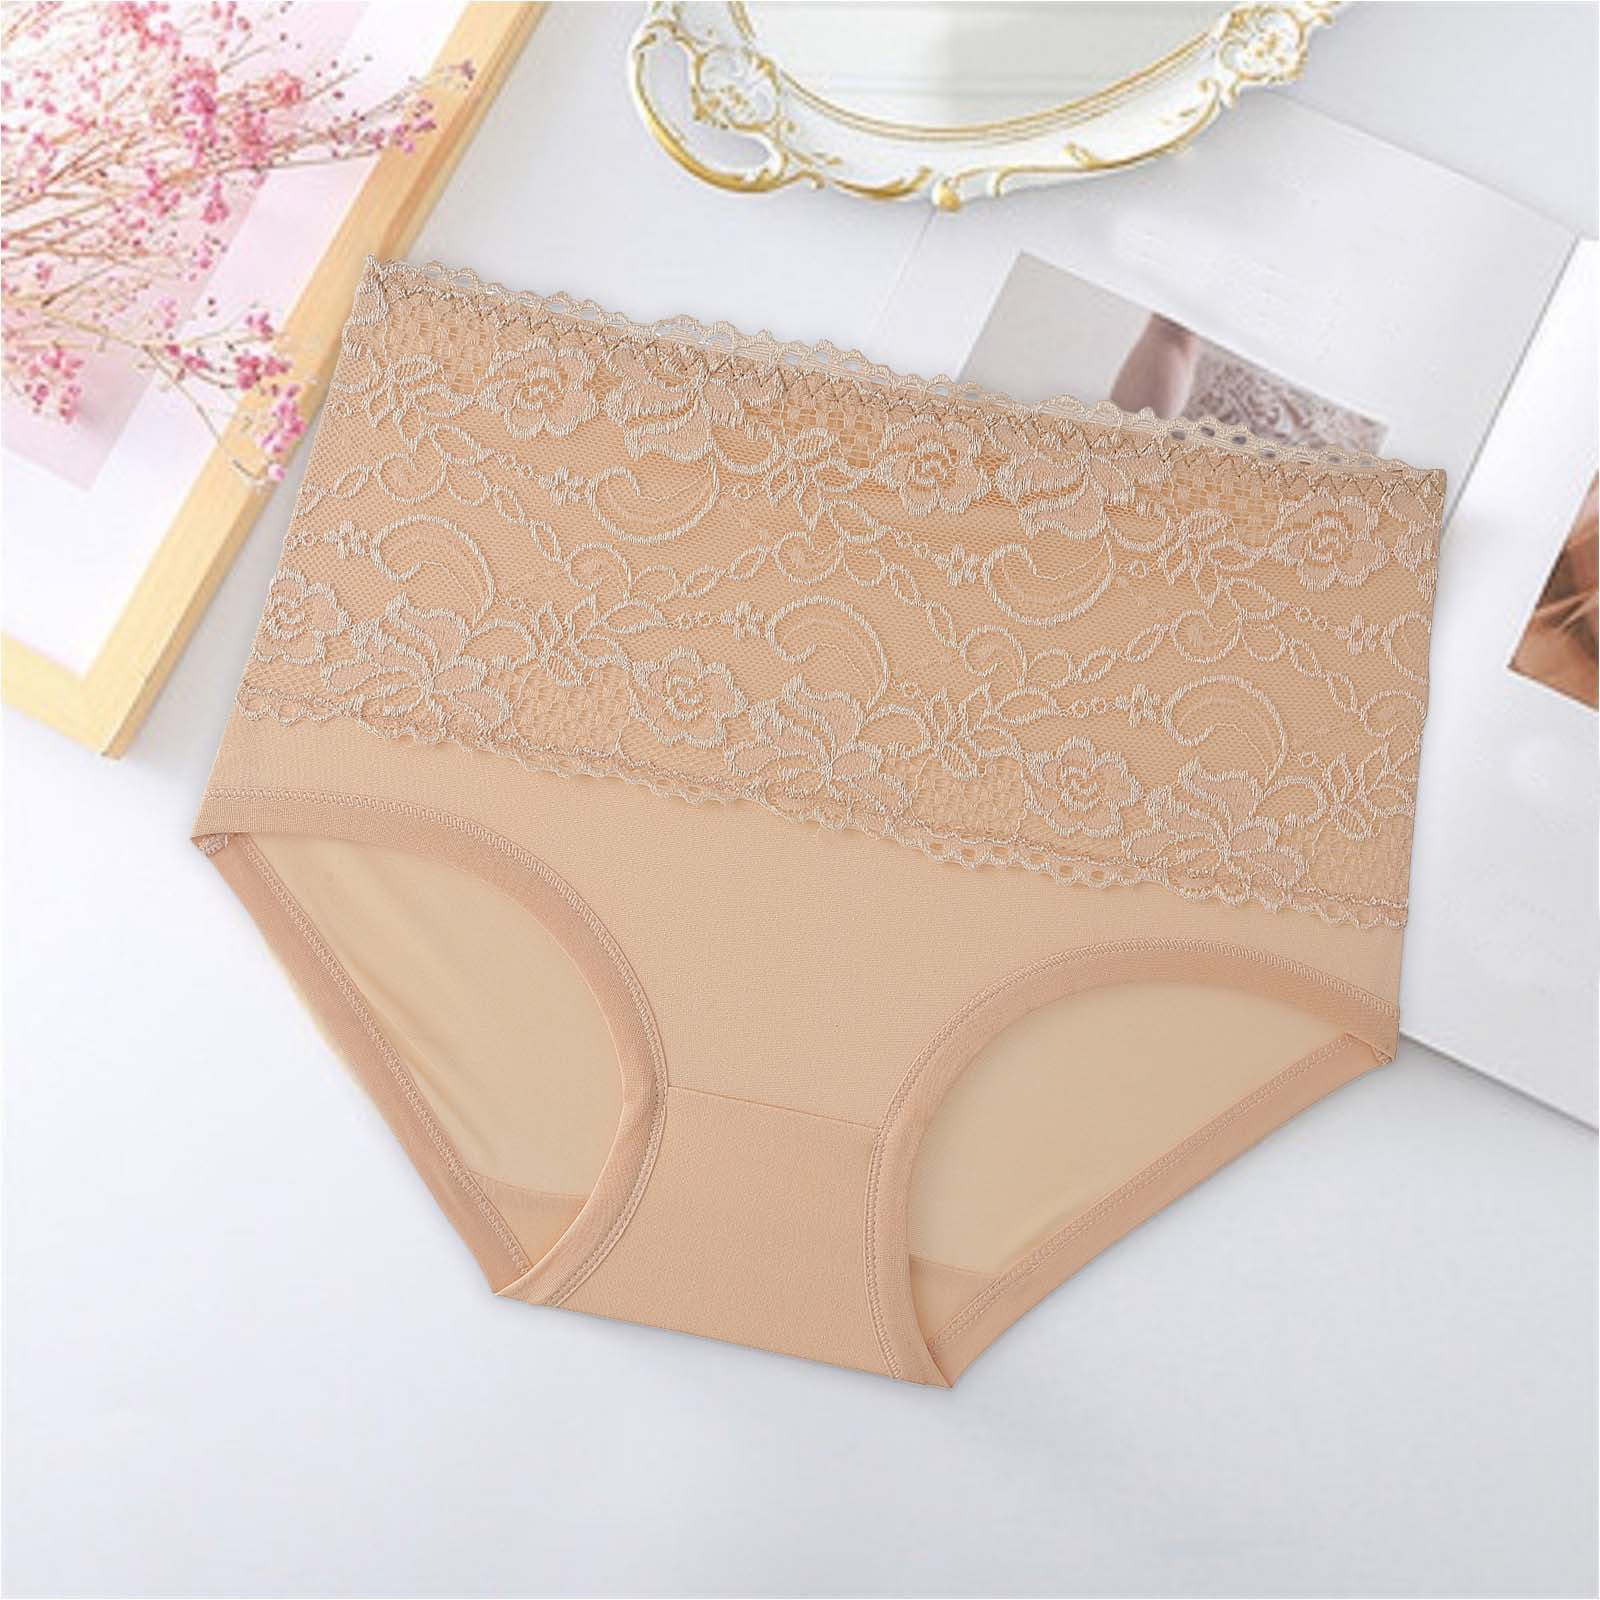 LBECLEY Womens Lingerie Top Spandex Panties Women Spring High